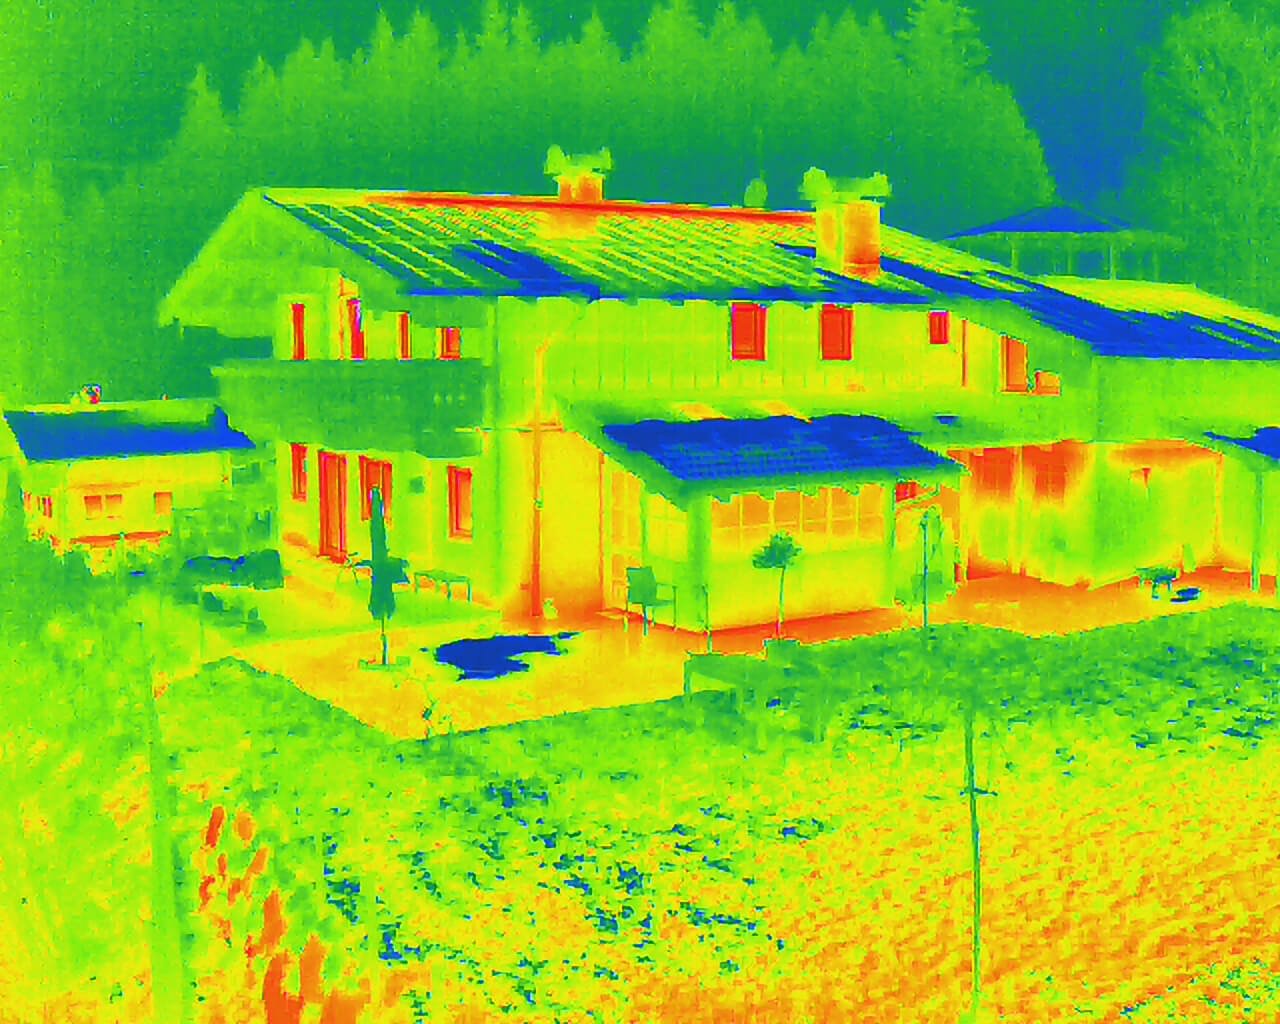 Recording with thermal imaging camera of DJI M30T drone